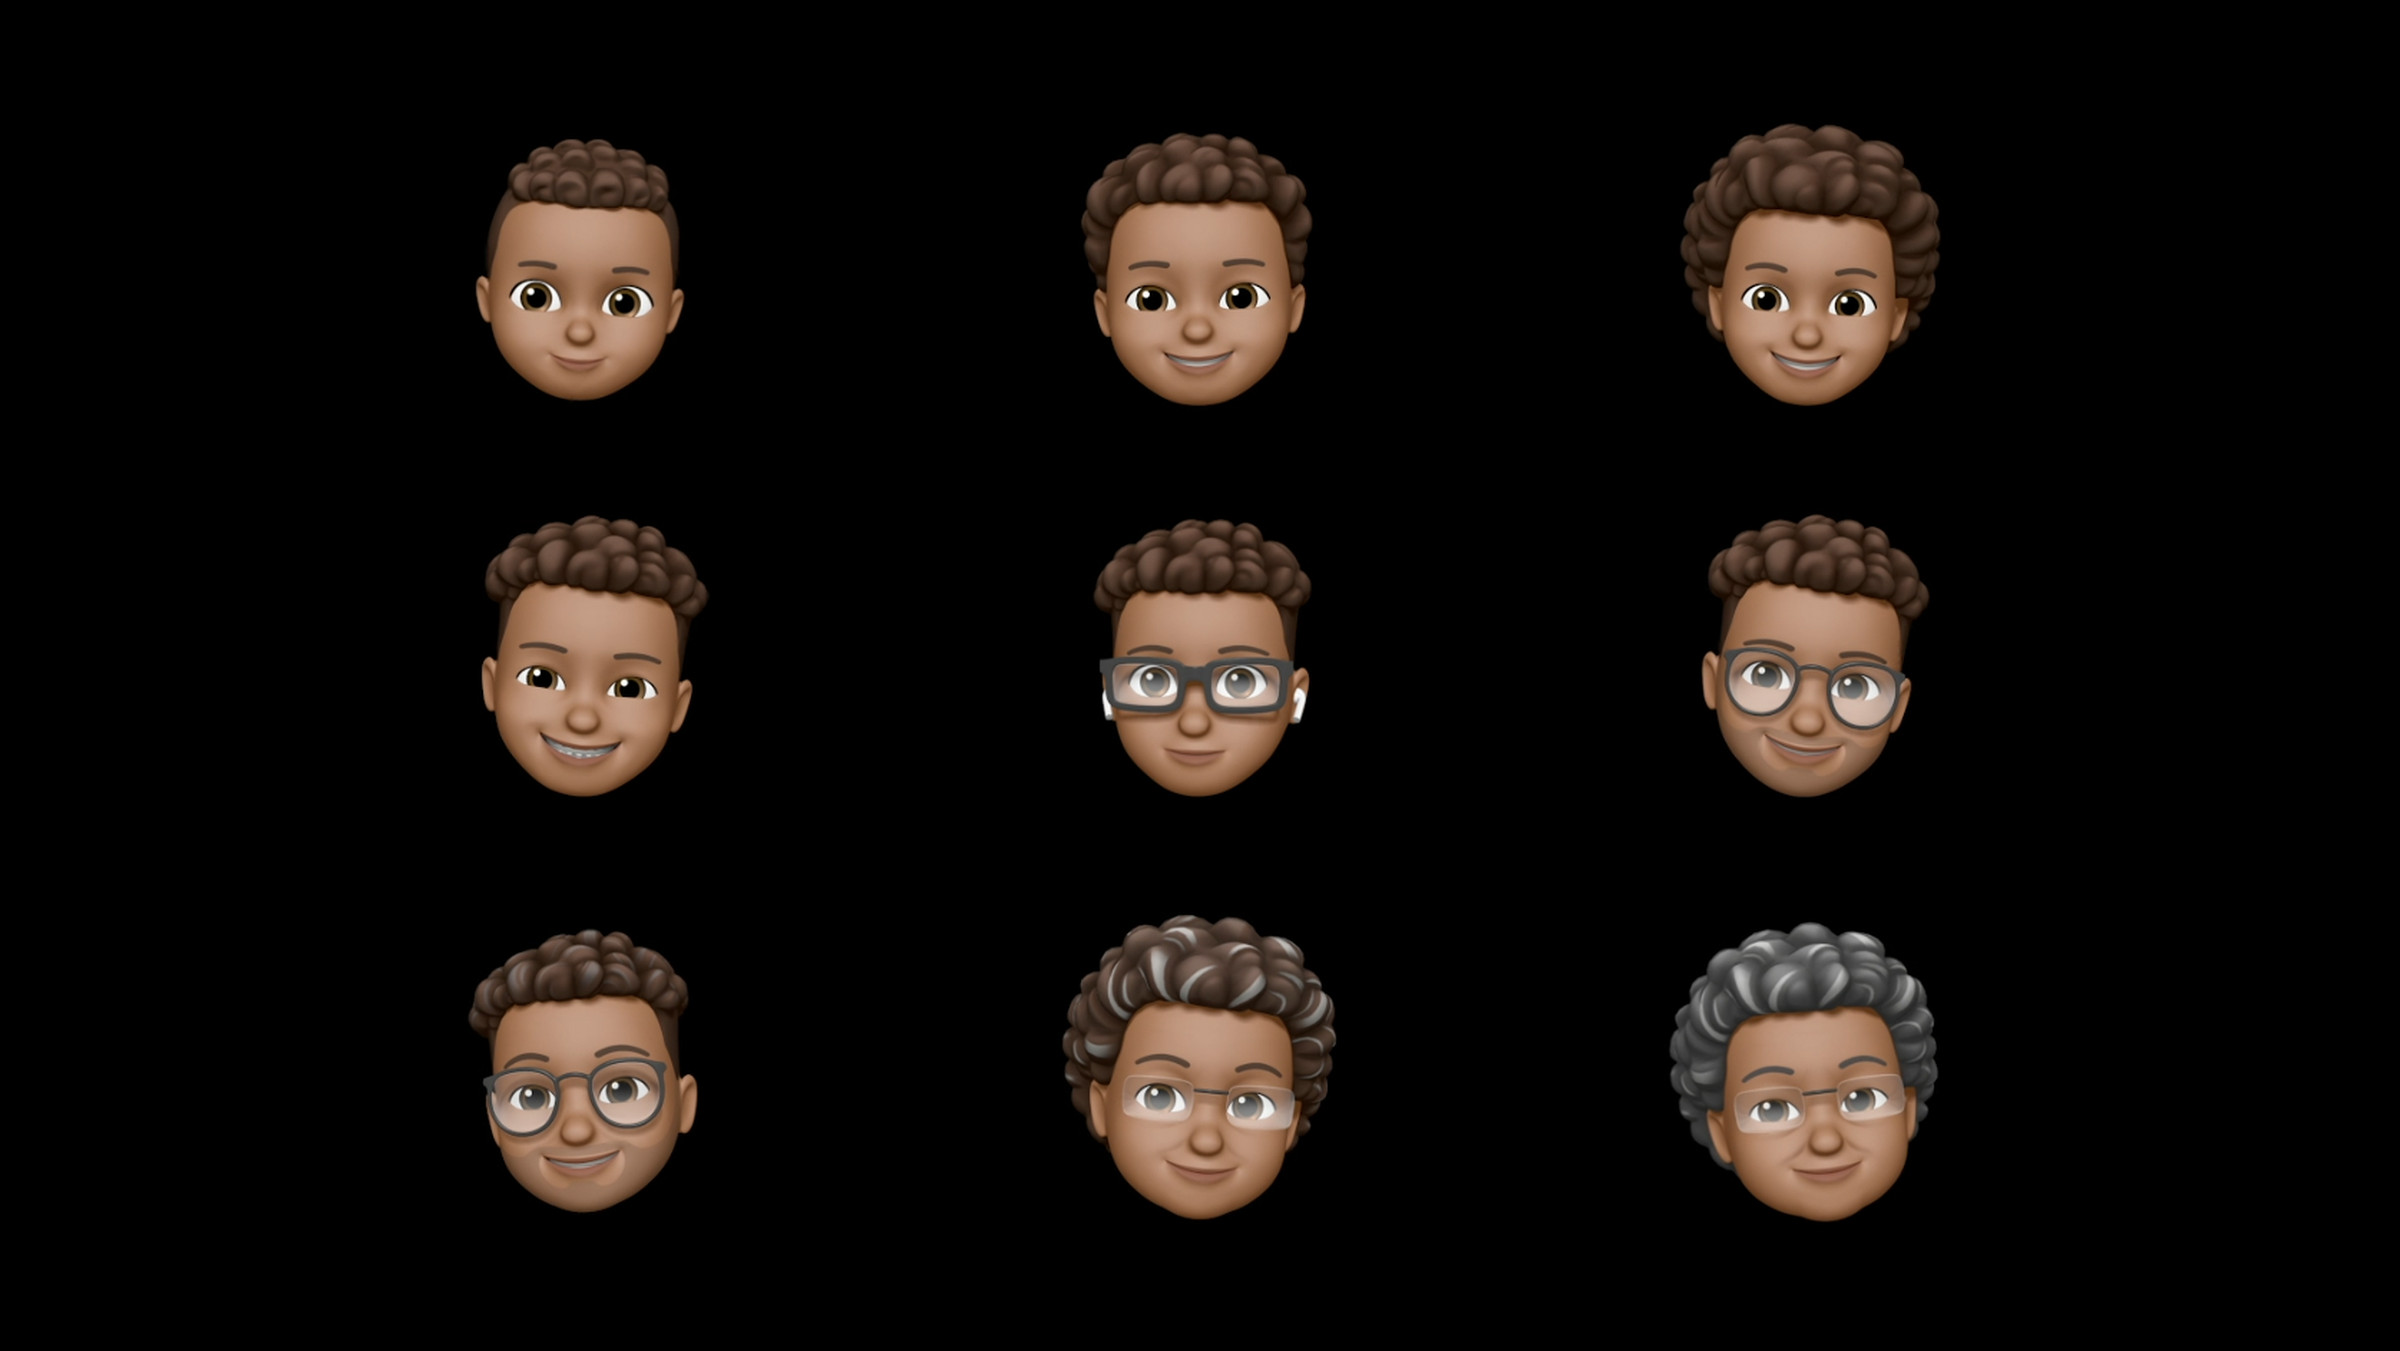 New age options are coming to Memoji. 